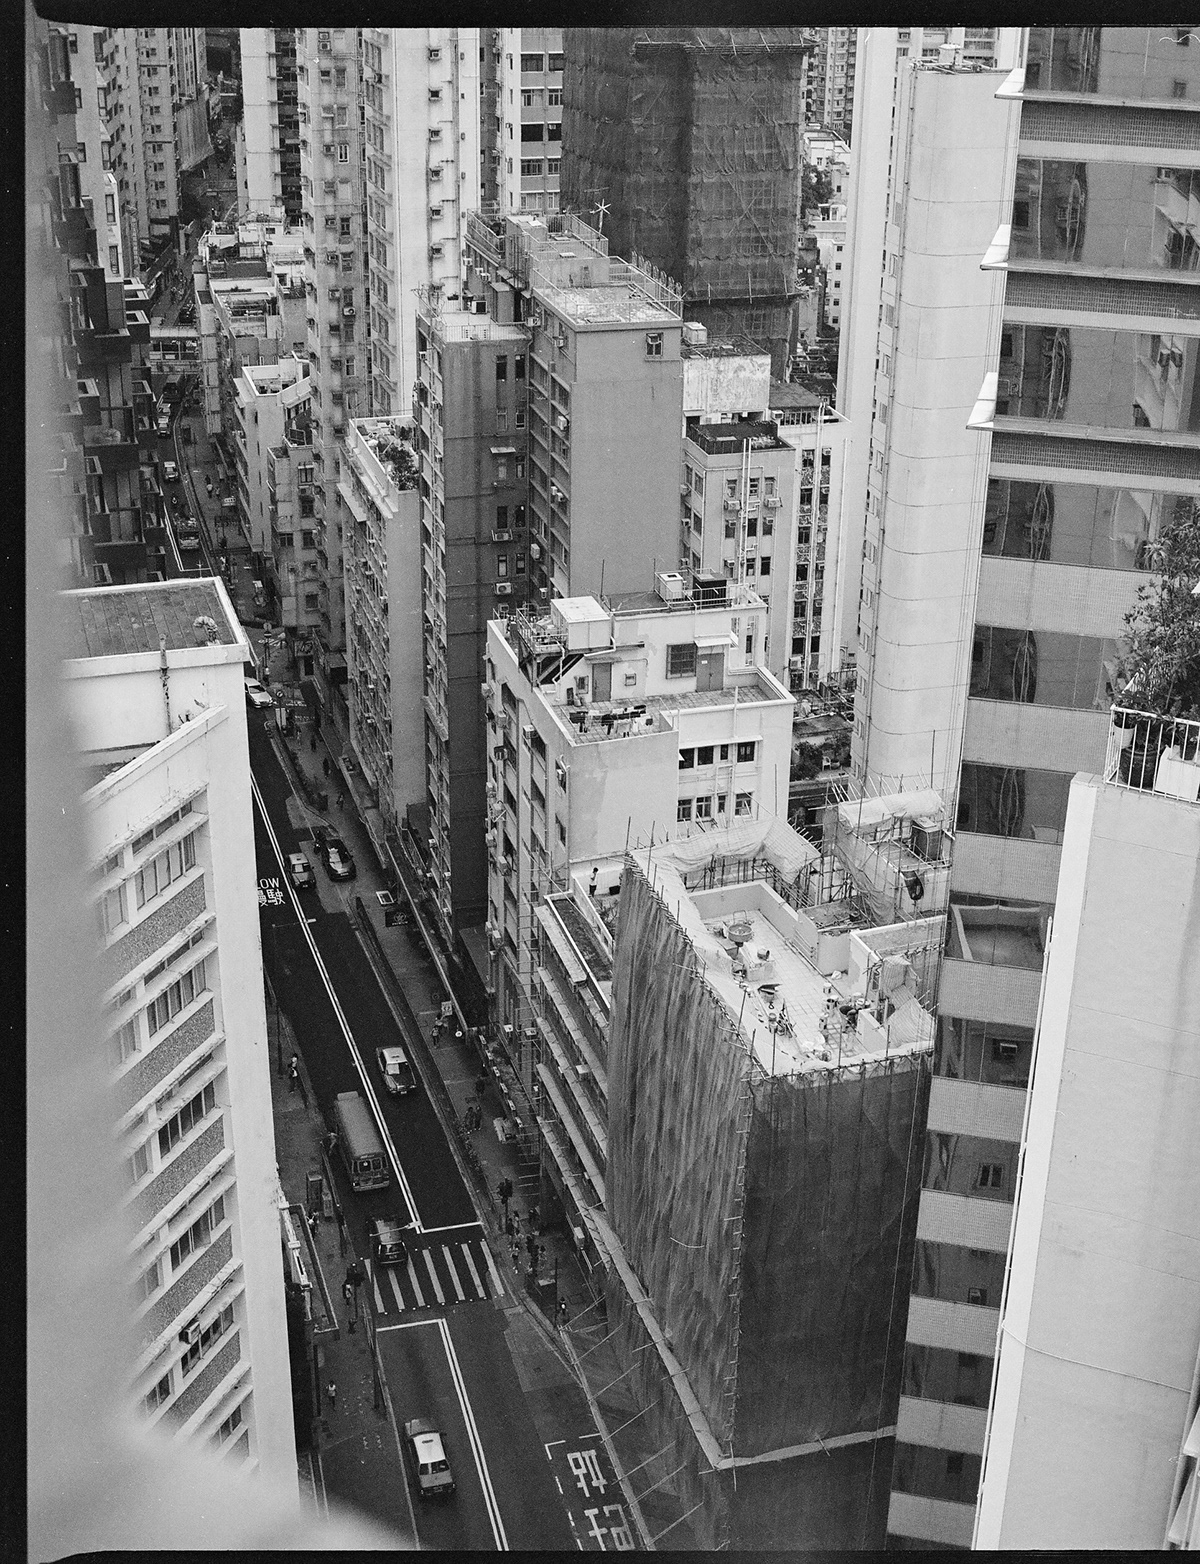 Hong Kong 120mm medium format film photography black and white cityscape 400 iso bronica etr ilford xp2 travel photography